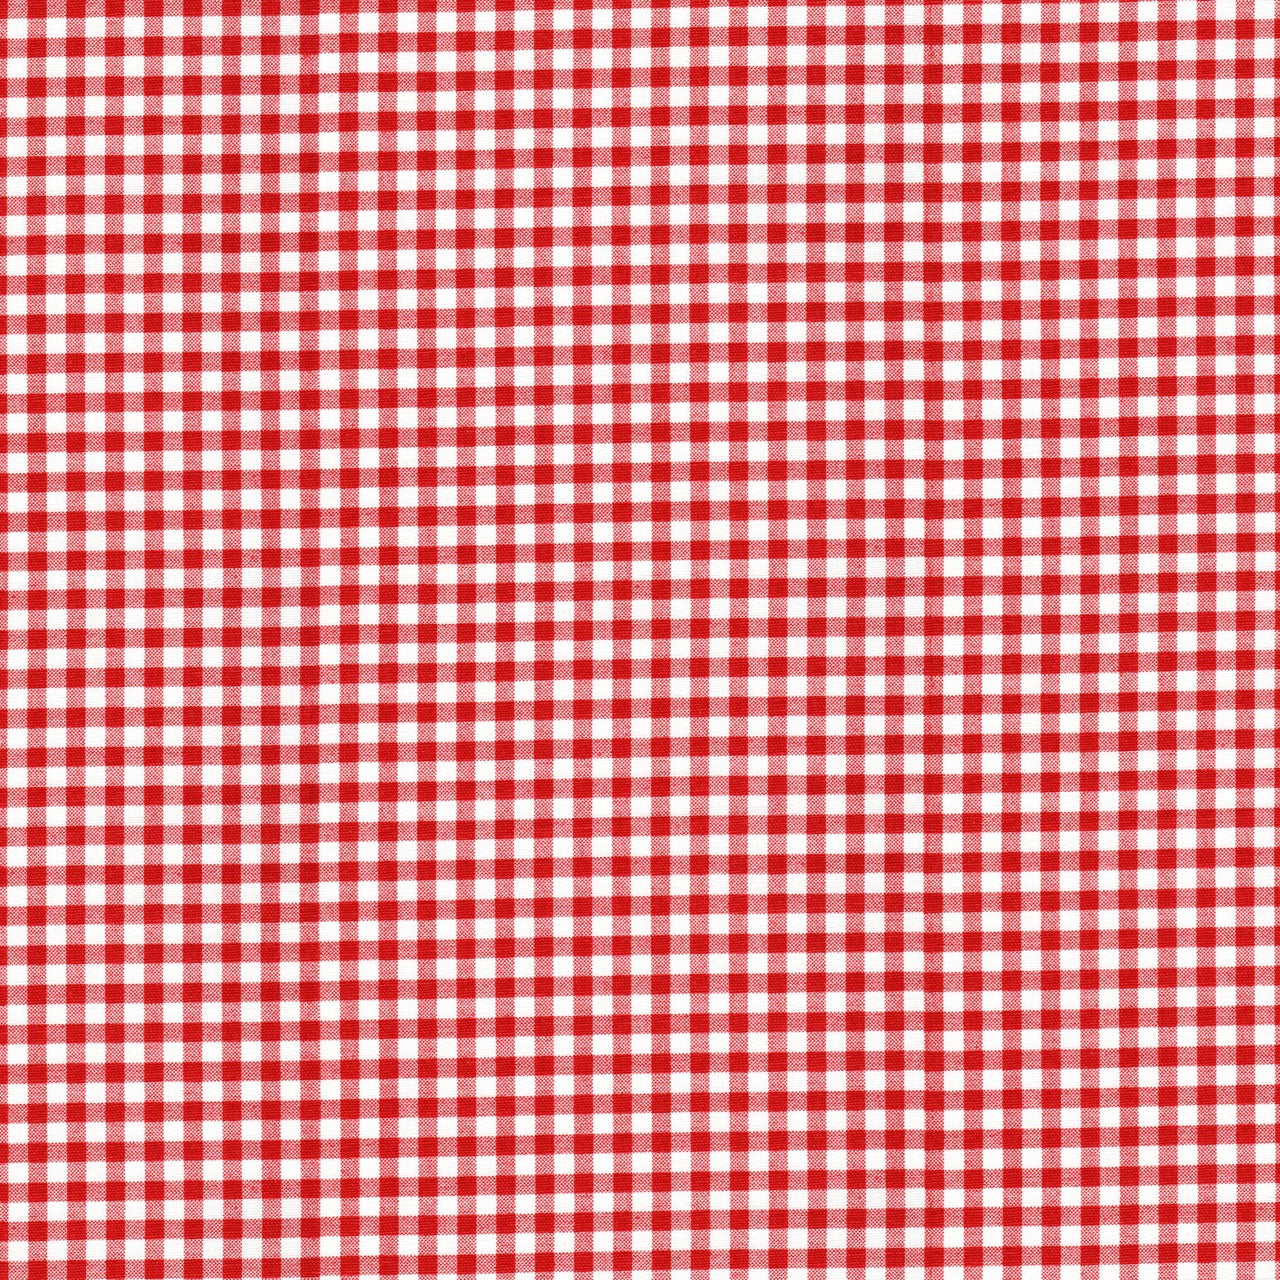 Gathered Crib Skirt in Lipstick Red Large Gingham Check on White Plaid